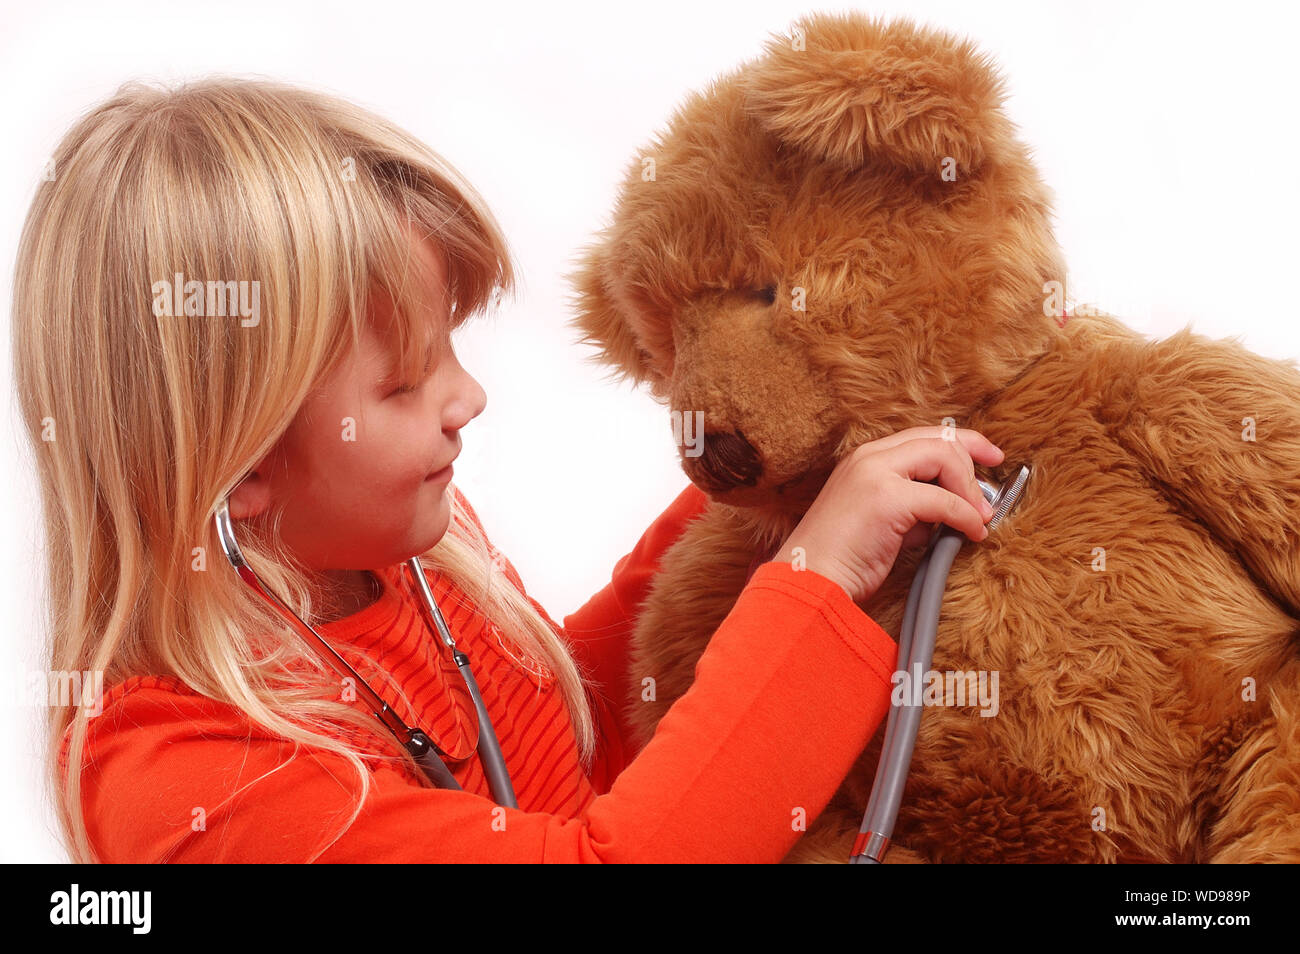 Blonde little girl holding a stethoscope to her big brown teddy bears heart. Stock Photo